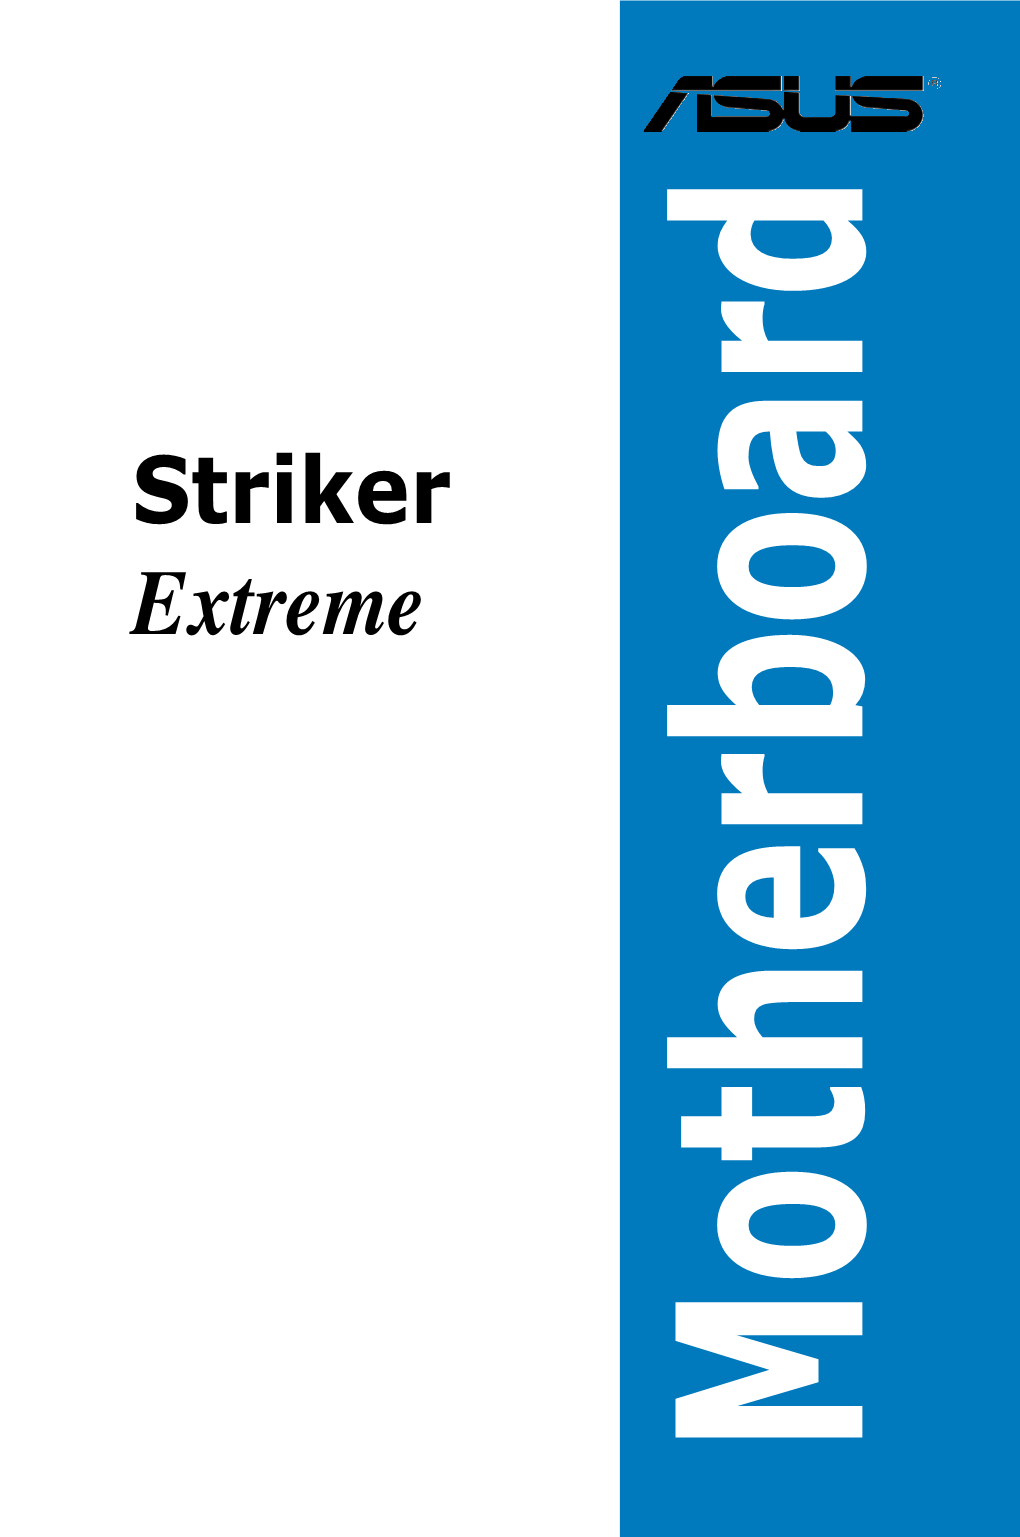 Striker Extreme Specifications Summary